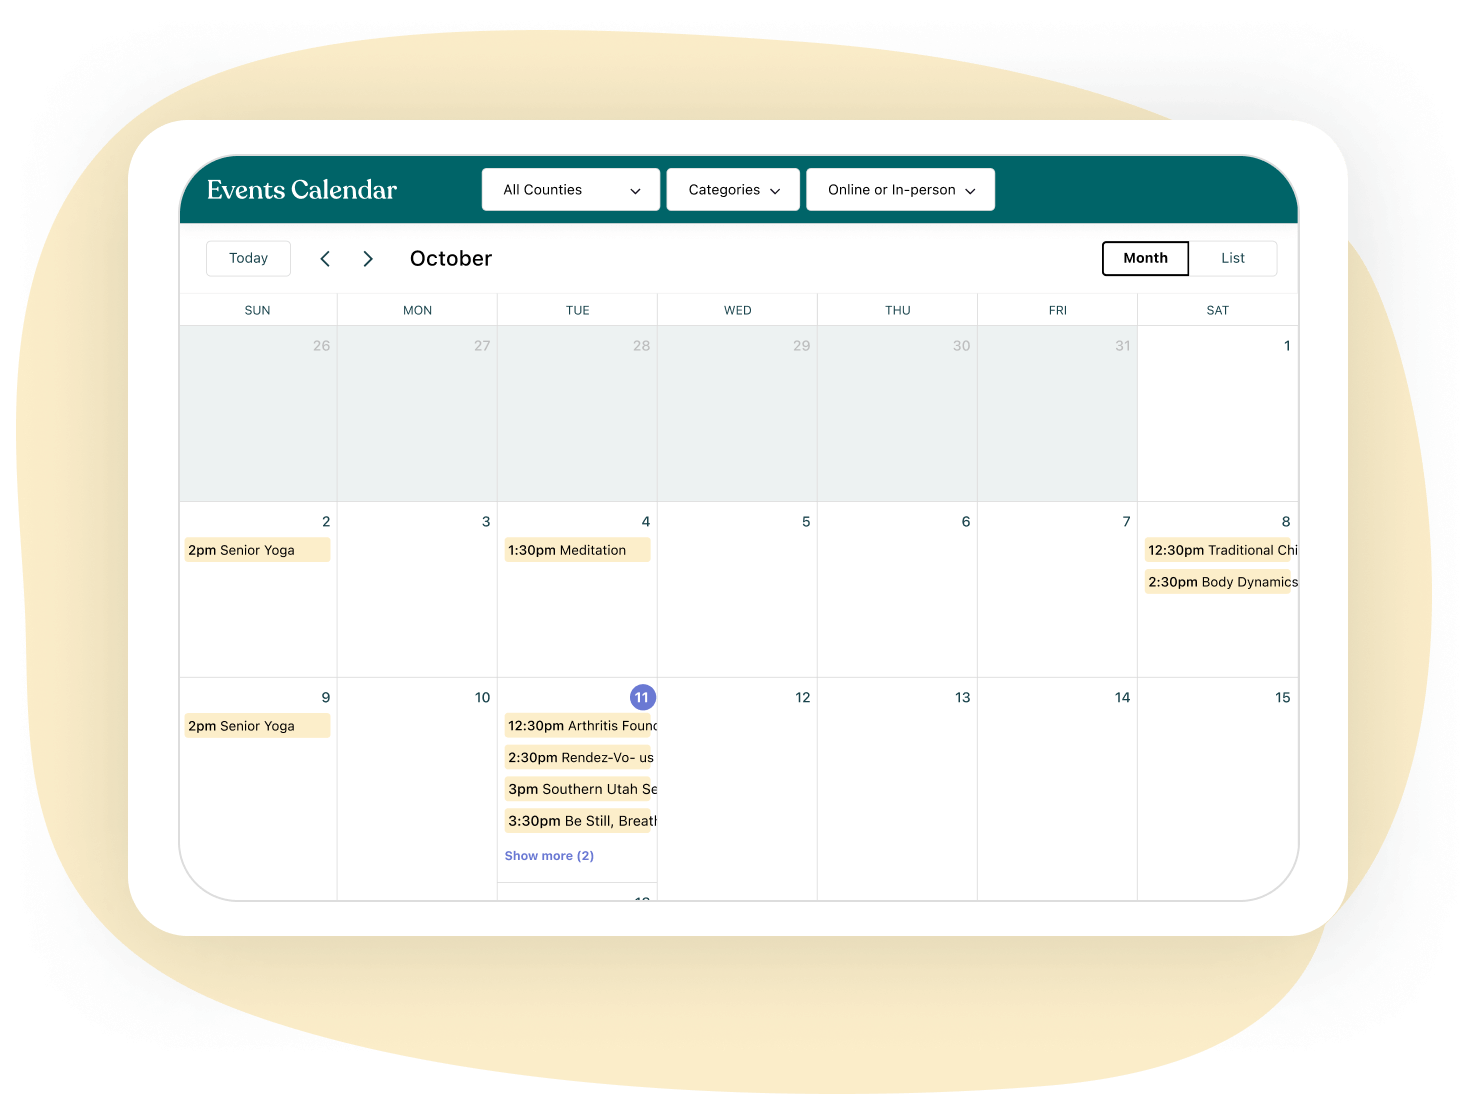 Calendar showing a month of events, such as Senior Yoga and and Meditation